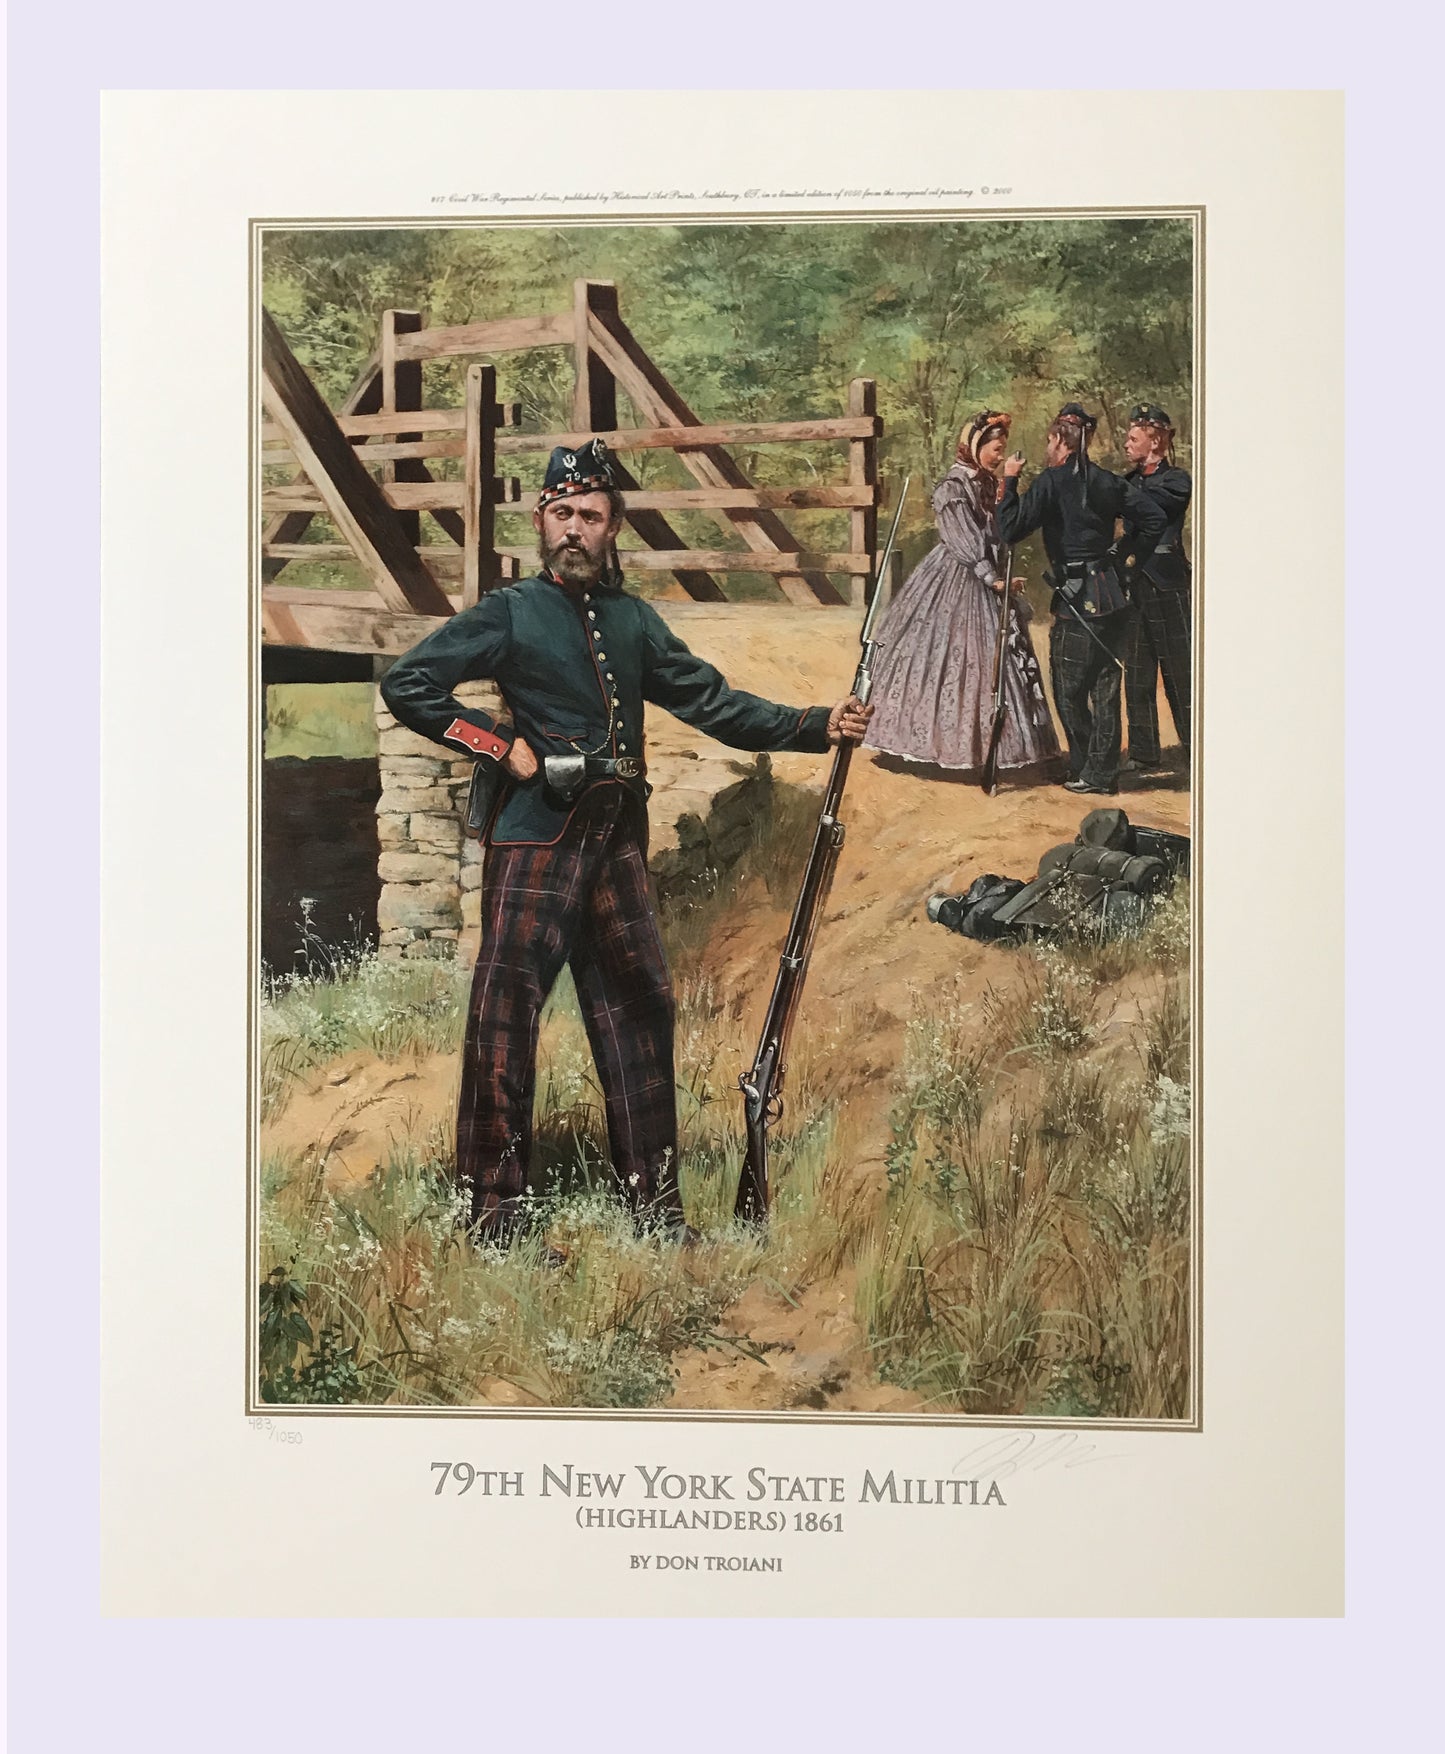 79th NY STATE MILITIA Limited Edition Civil War Print by Don Troiani